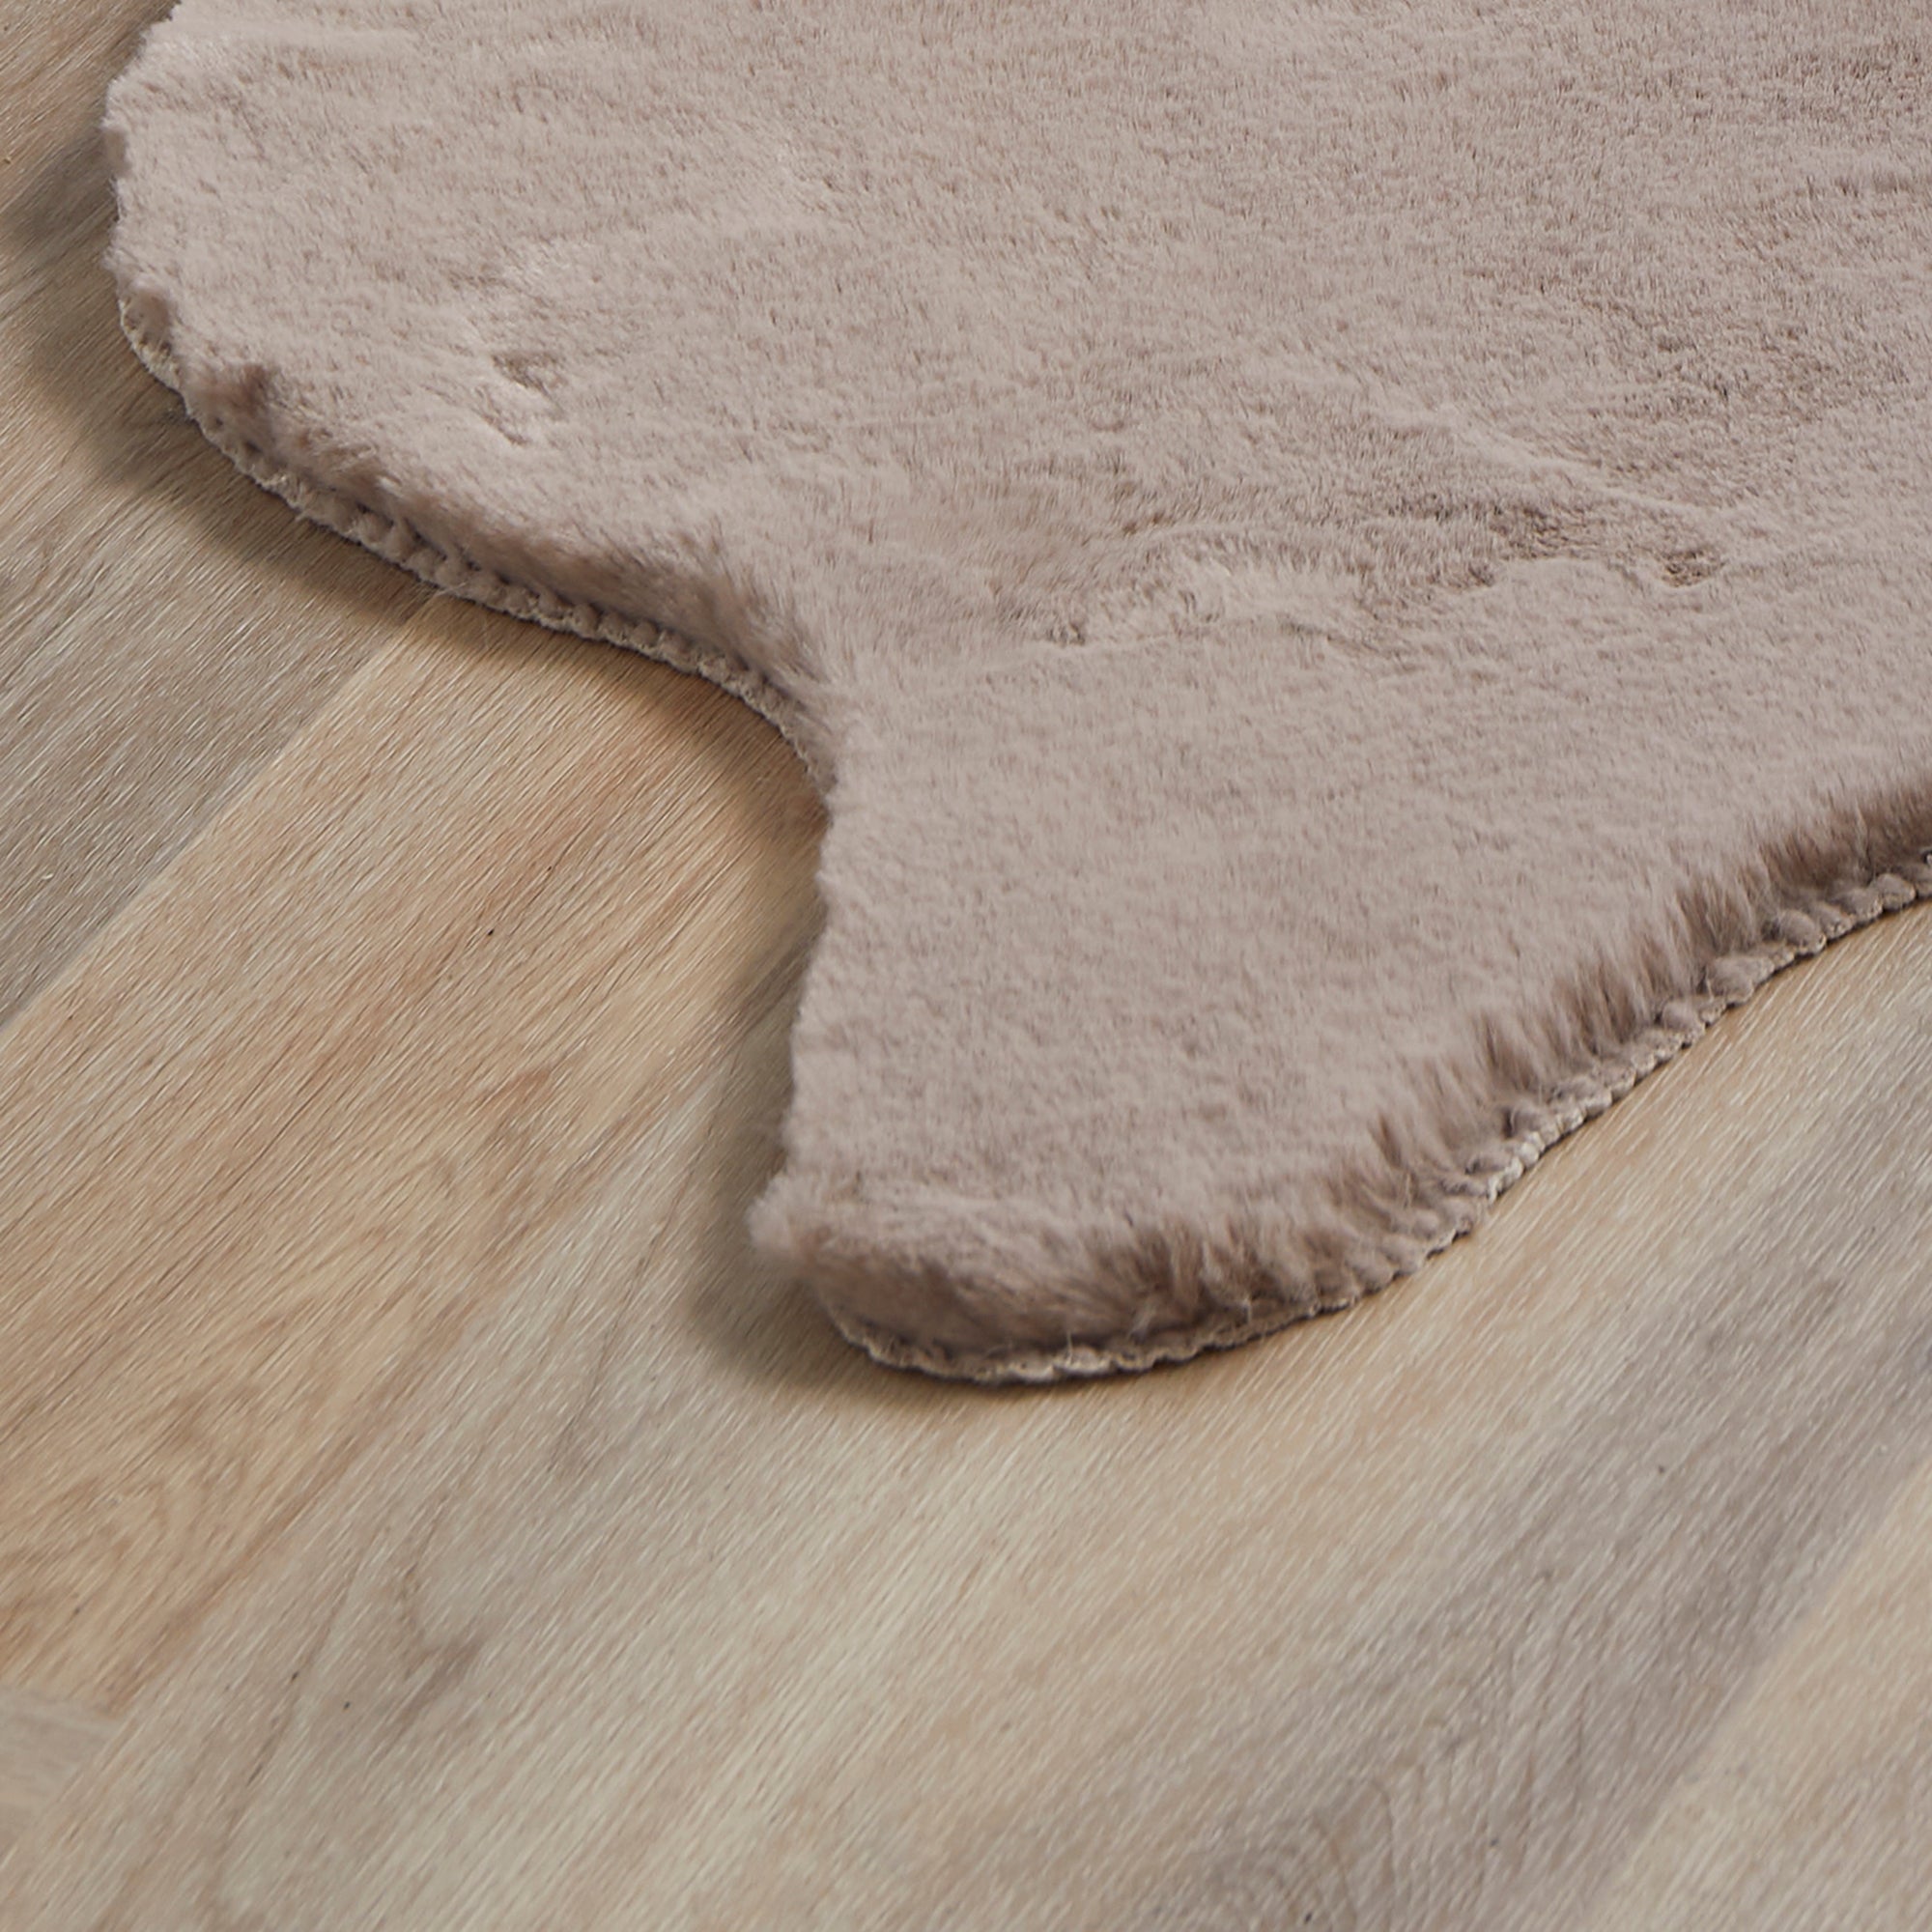 Shaped Rug - Faux Fur Shaped Rug in Mink - by Fusion